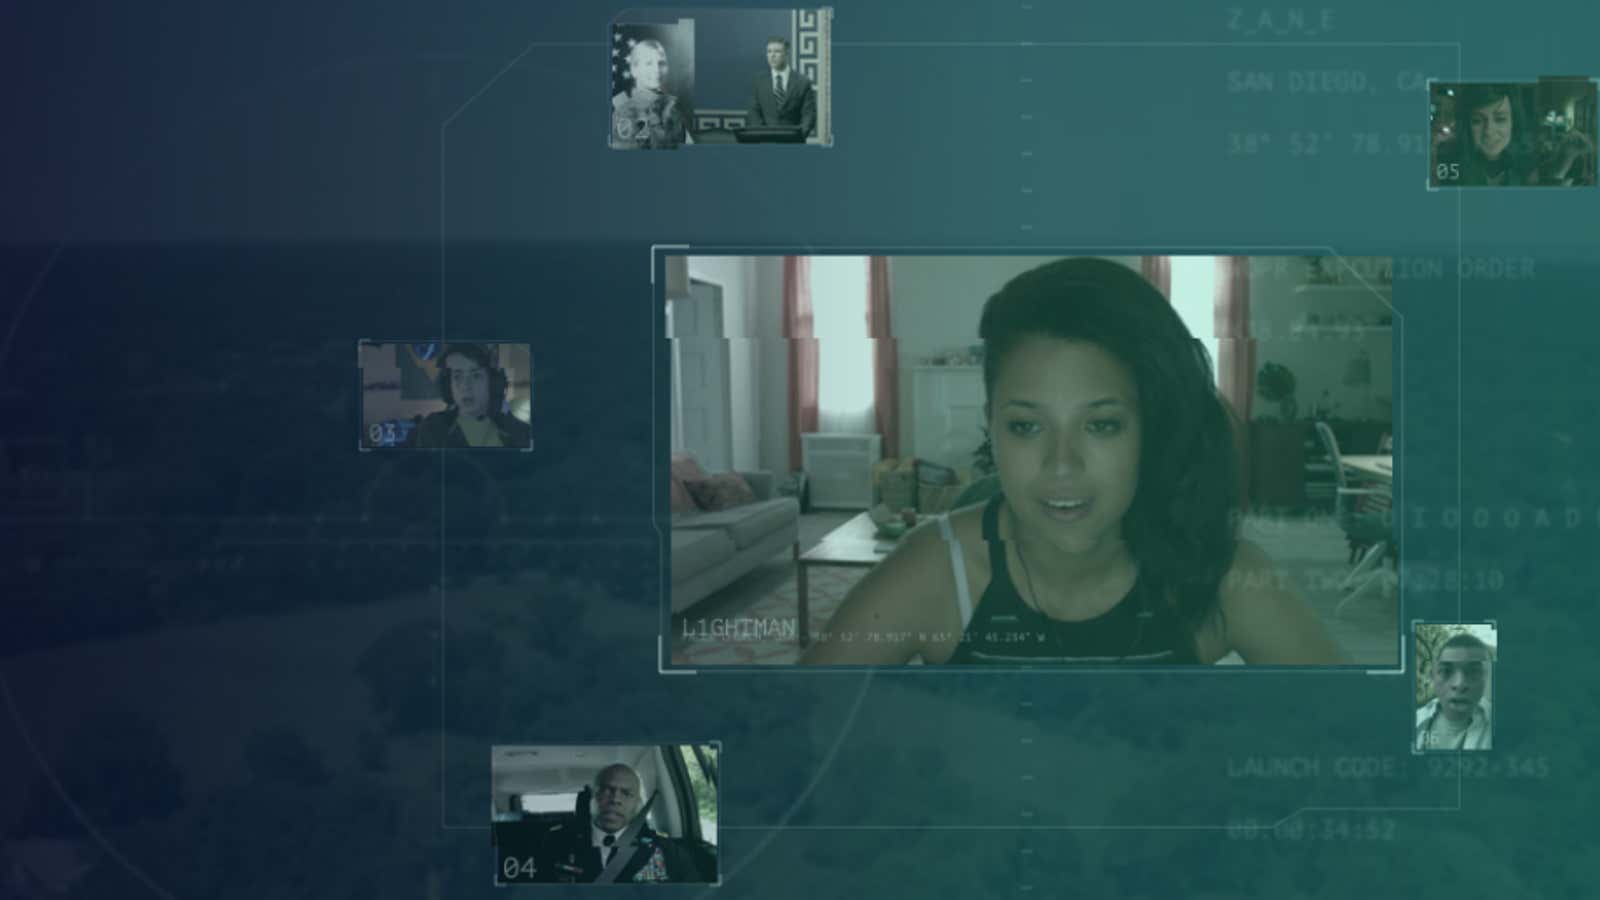 Eko’s upcoming #WarGames will unfold differently depending on how viewers watch.